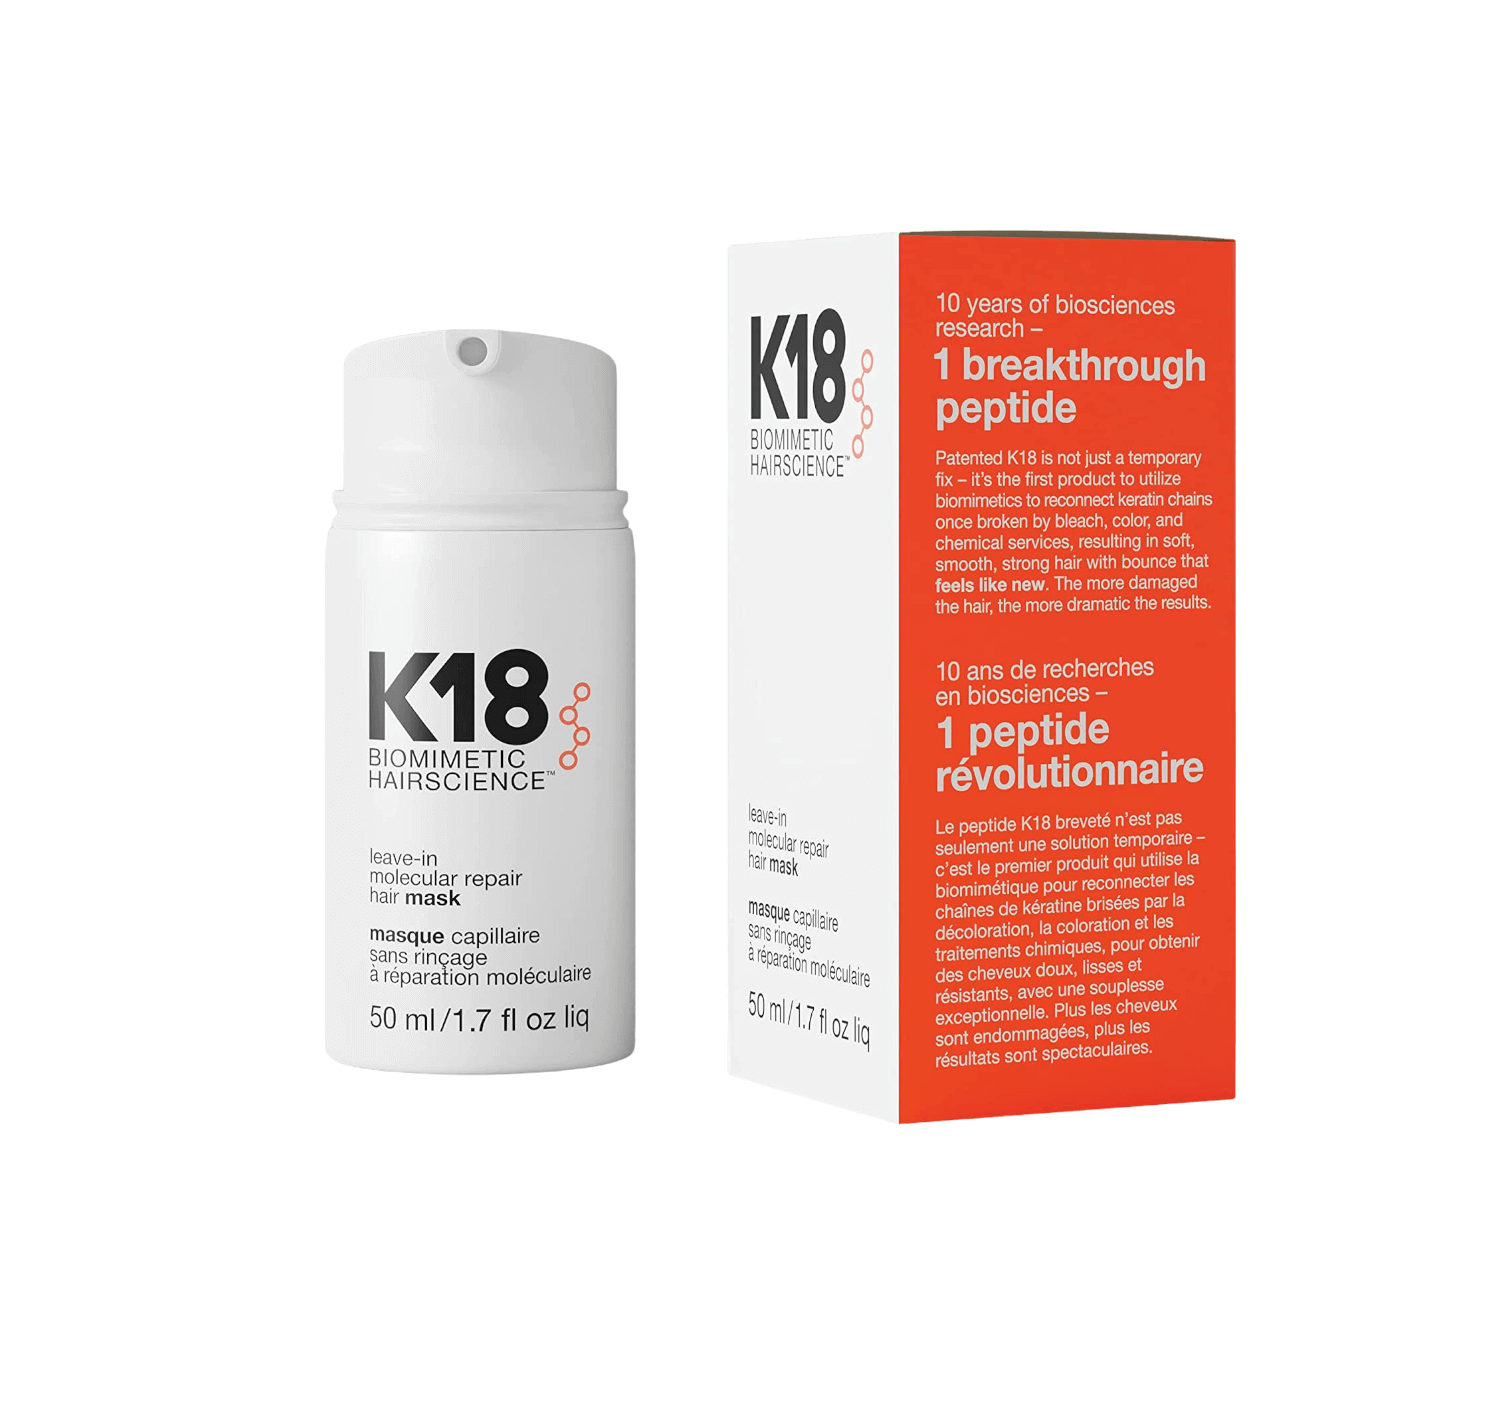 K18 Biotech oil that instantly repairs keratin chains in 4 minutes